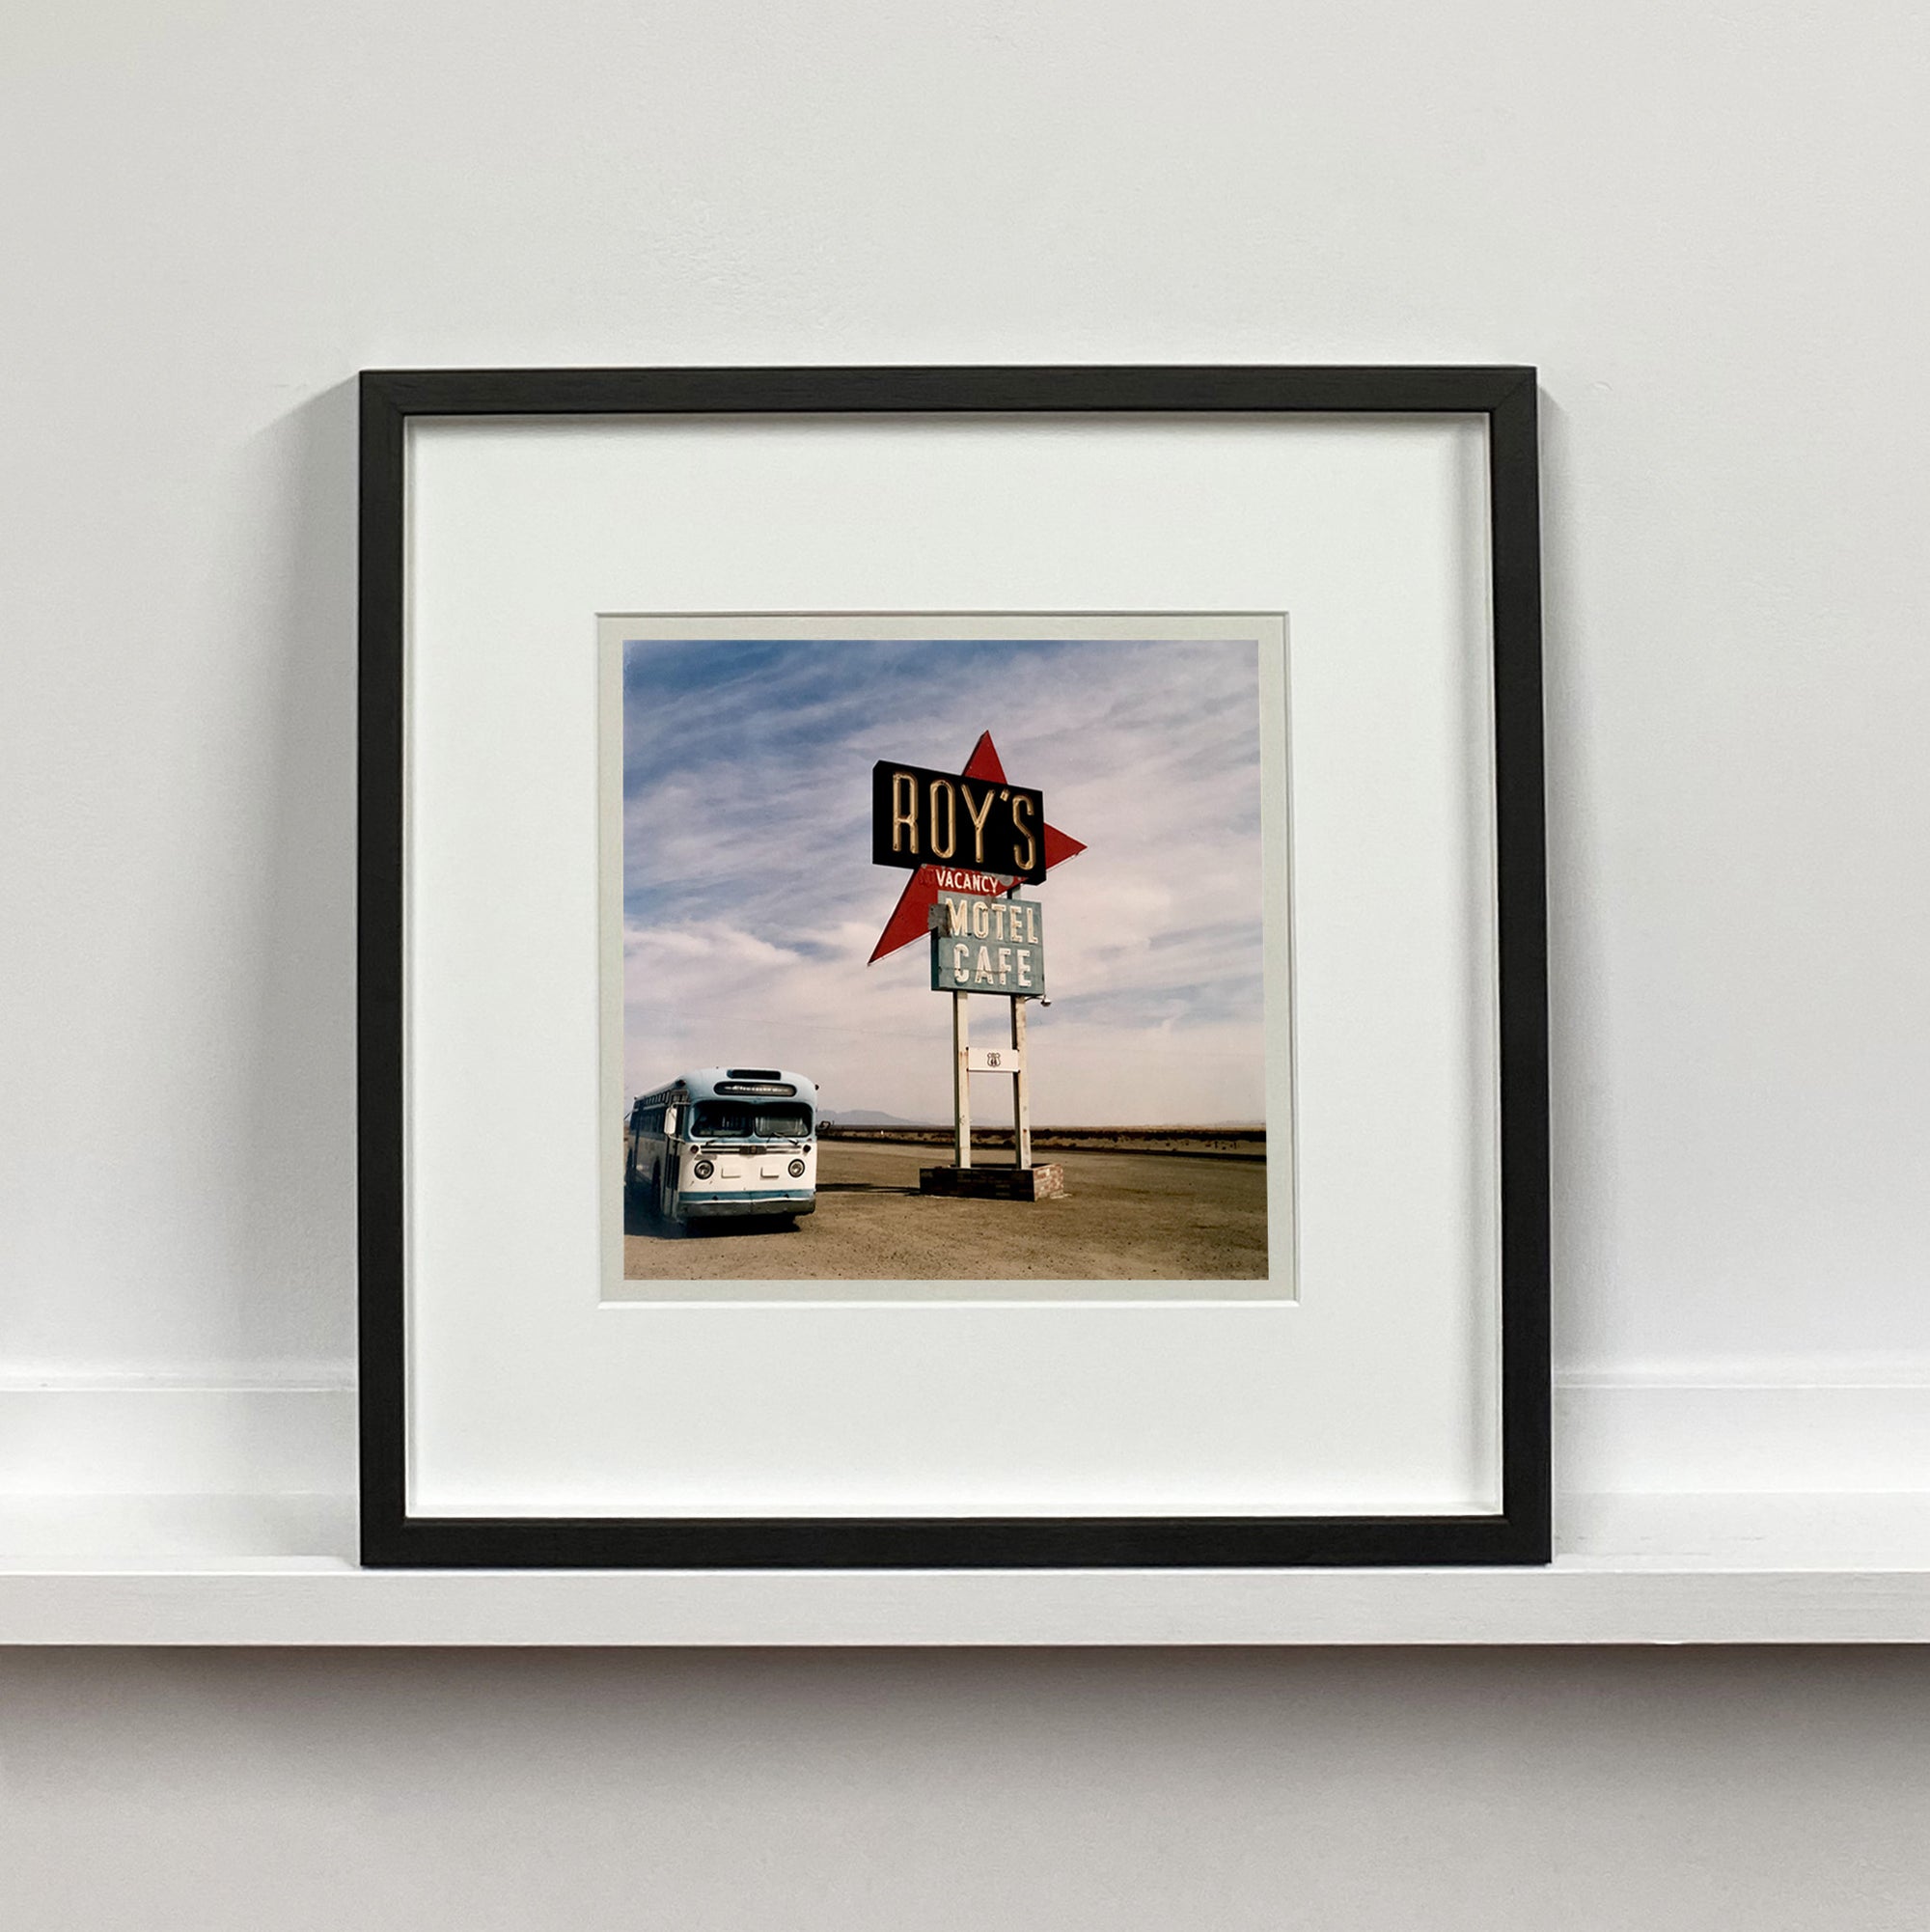 'Bus - Roy's Route 66', part of Richard Heeps 'Dream in Colour' series. This is one of Richard's classic American signs artworks, photographed at the iconic Roy's Motel on Route 66, Amboy, California, featuring the famous 1960's GM Bus.